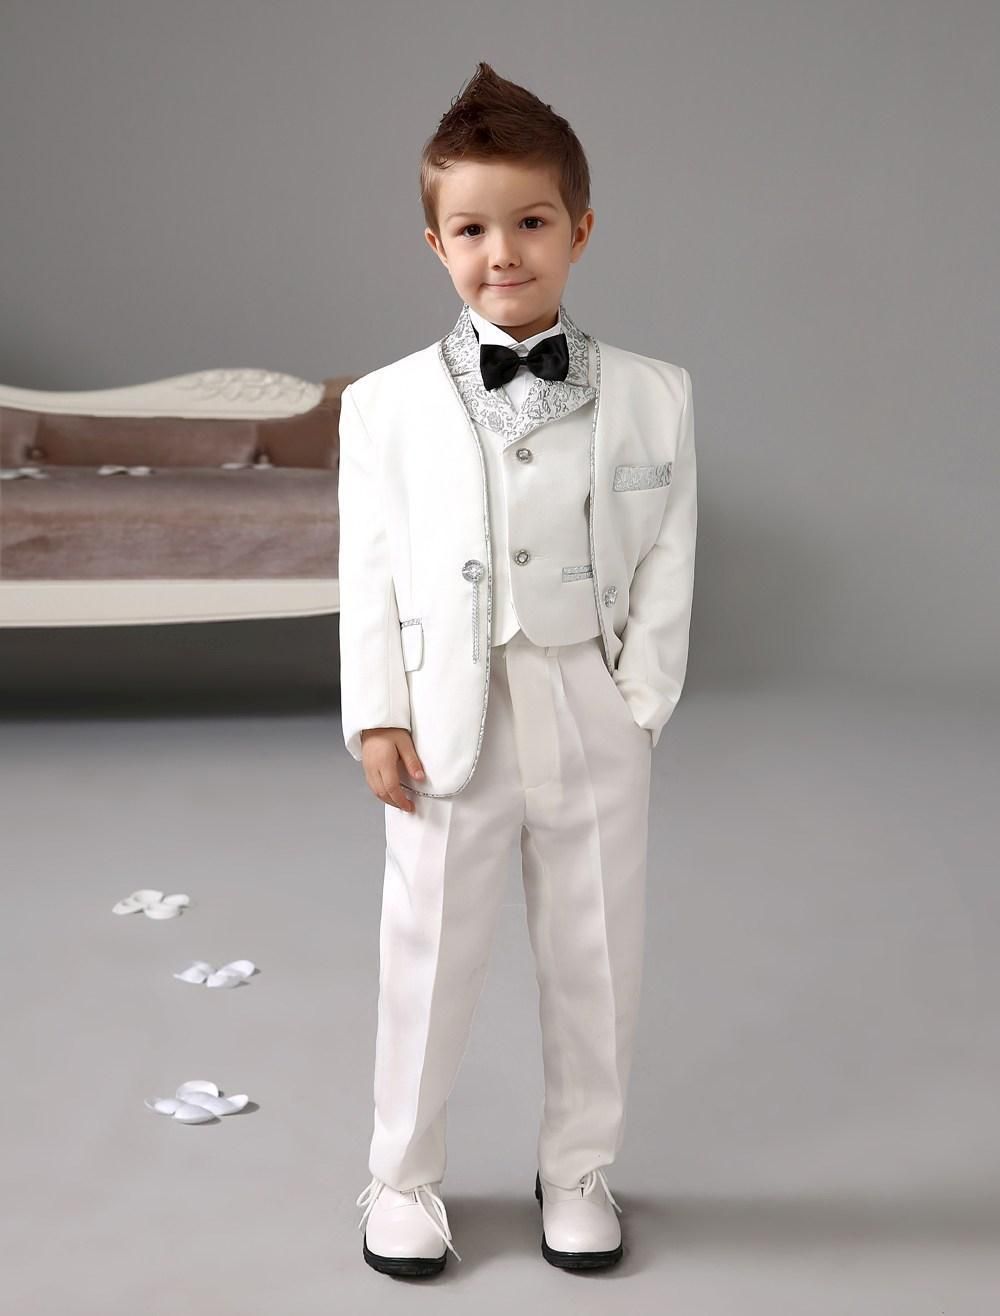 New Arrivals One Button White Boy'S Formal Wear Occasion Kids Tuxedos ...